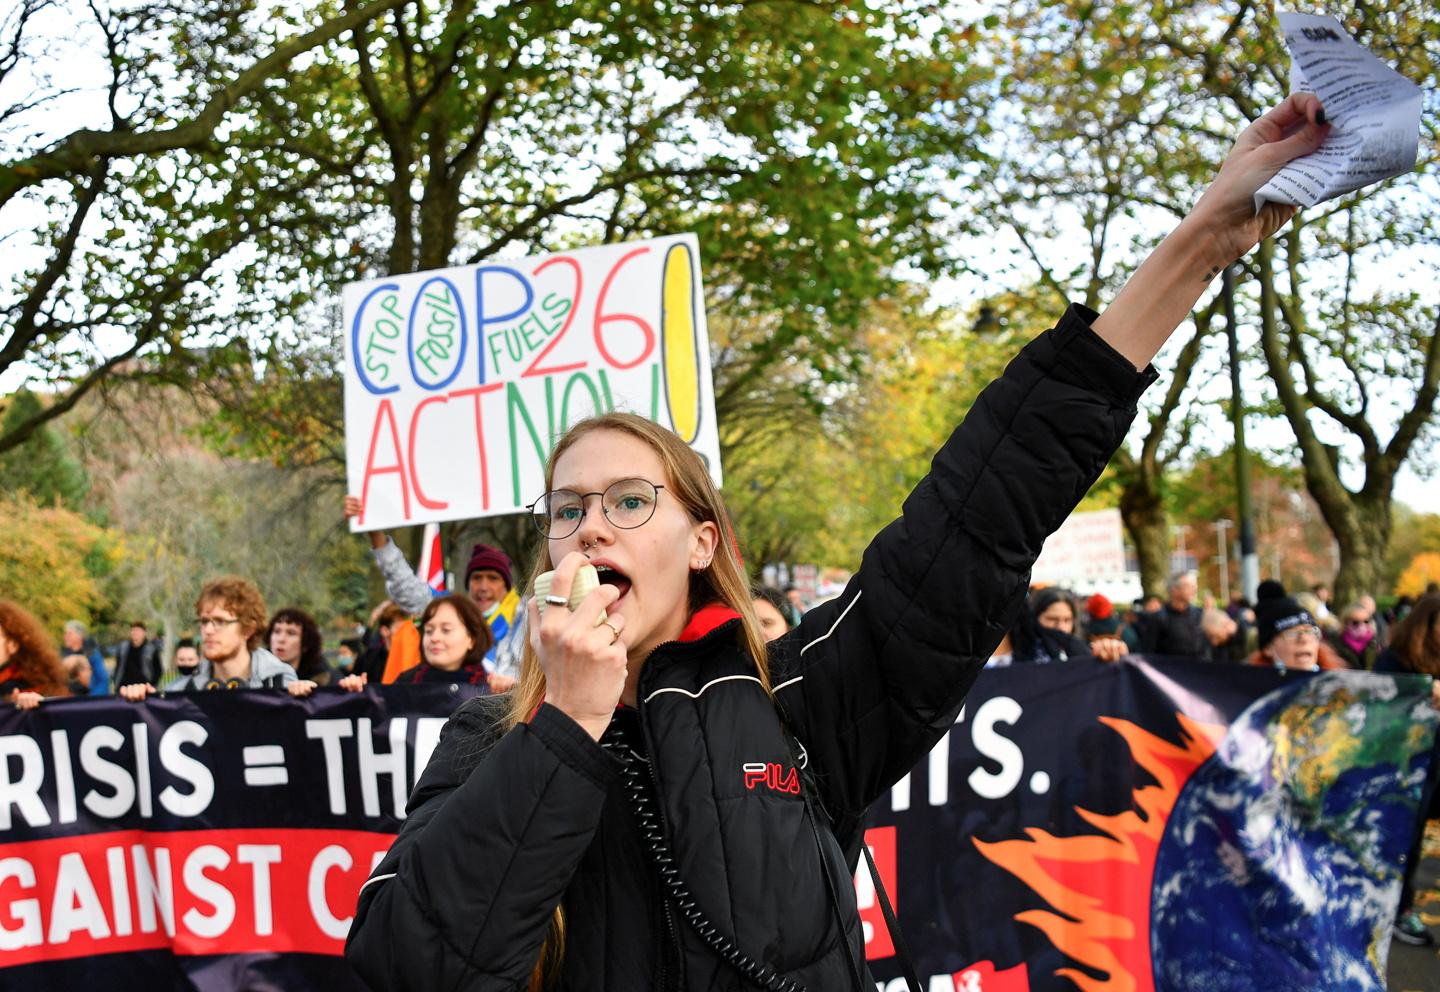 A demonstrator speaks through a megaphone as Youth activists protest in the Fridays for Future march during the UN Climate Change Conference (COP26), in Glasgow, Scotland, Britain, November 5, 2021.